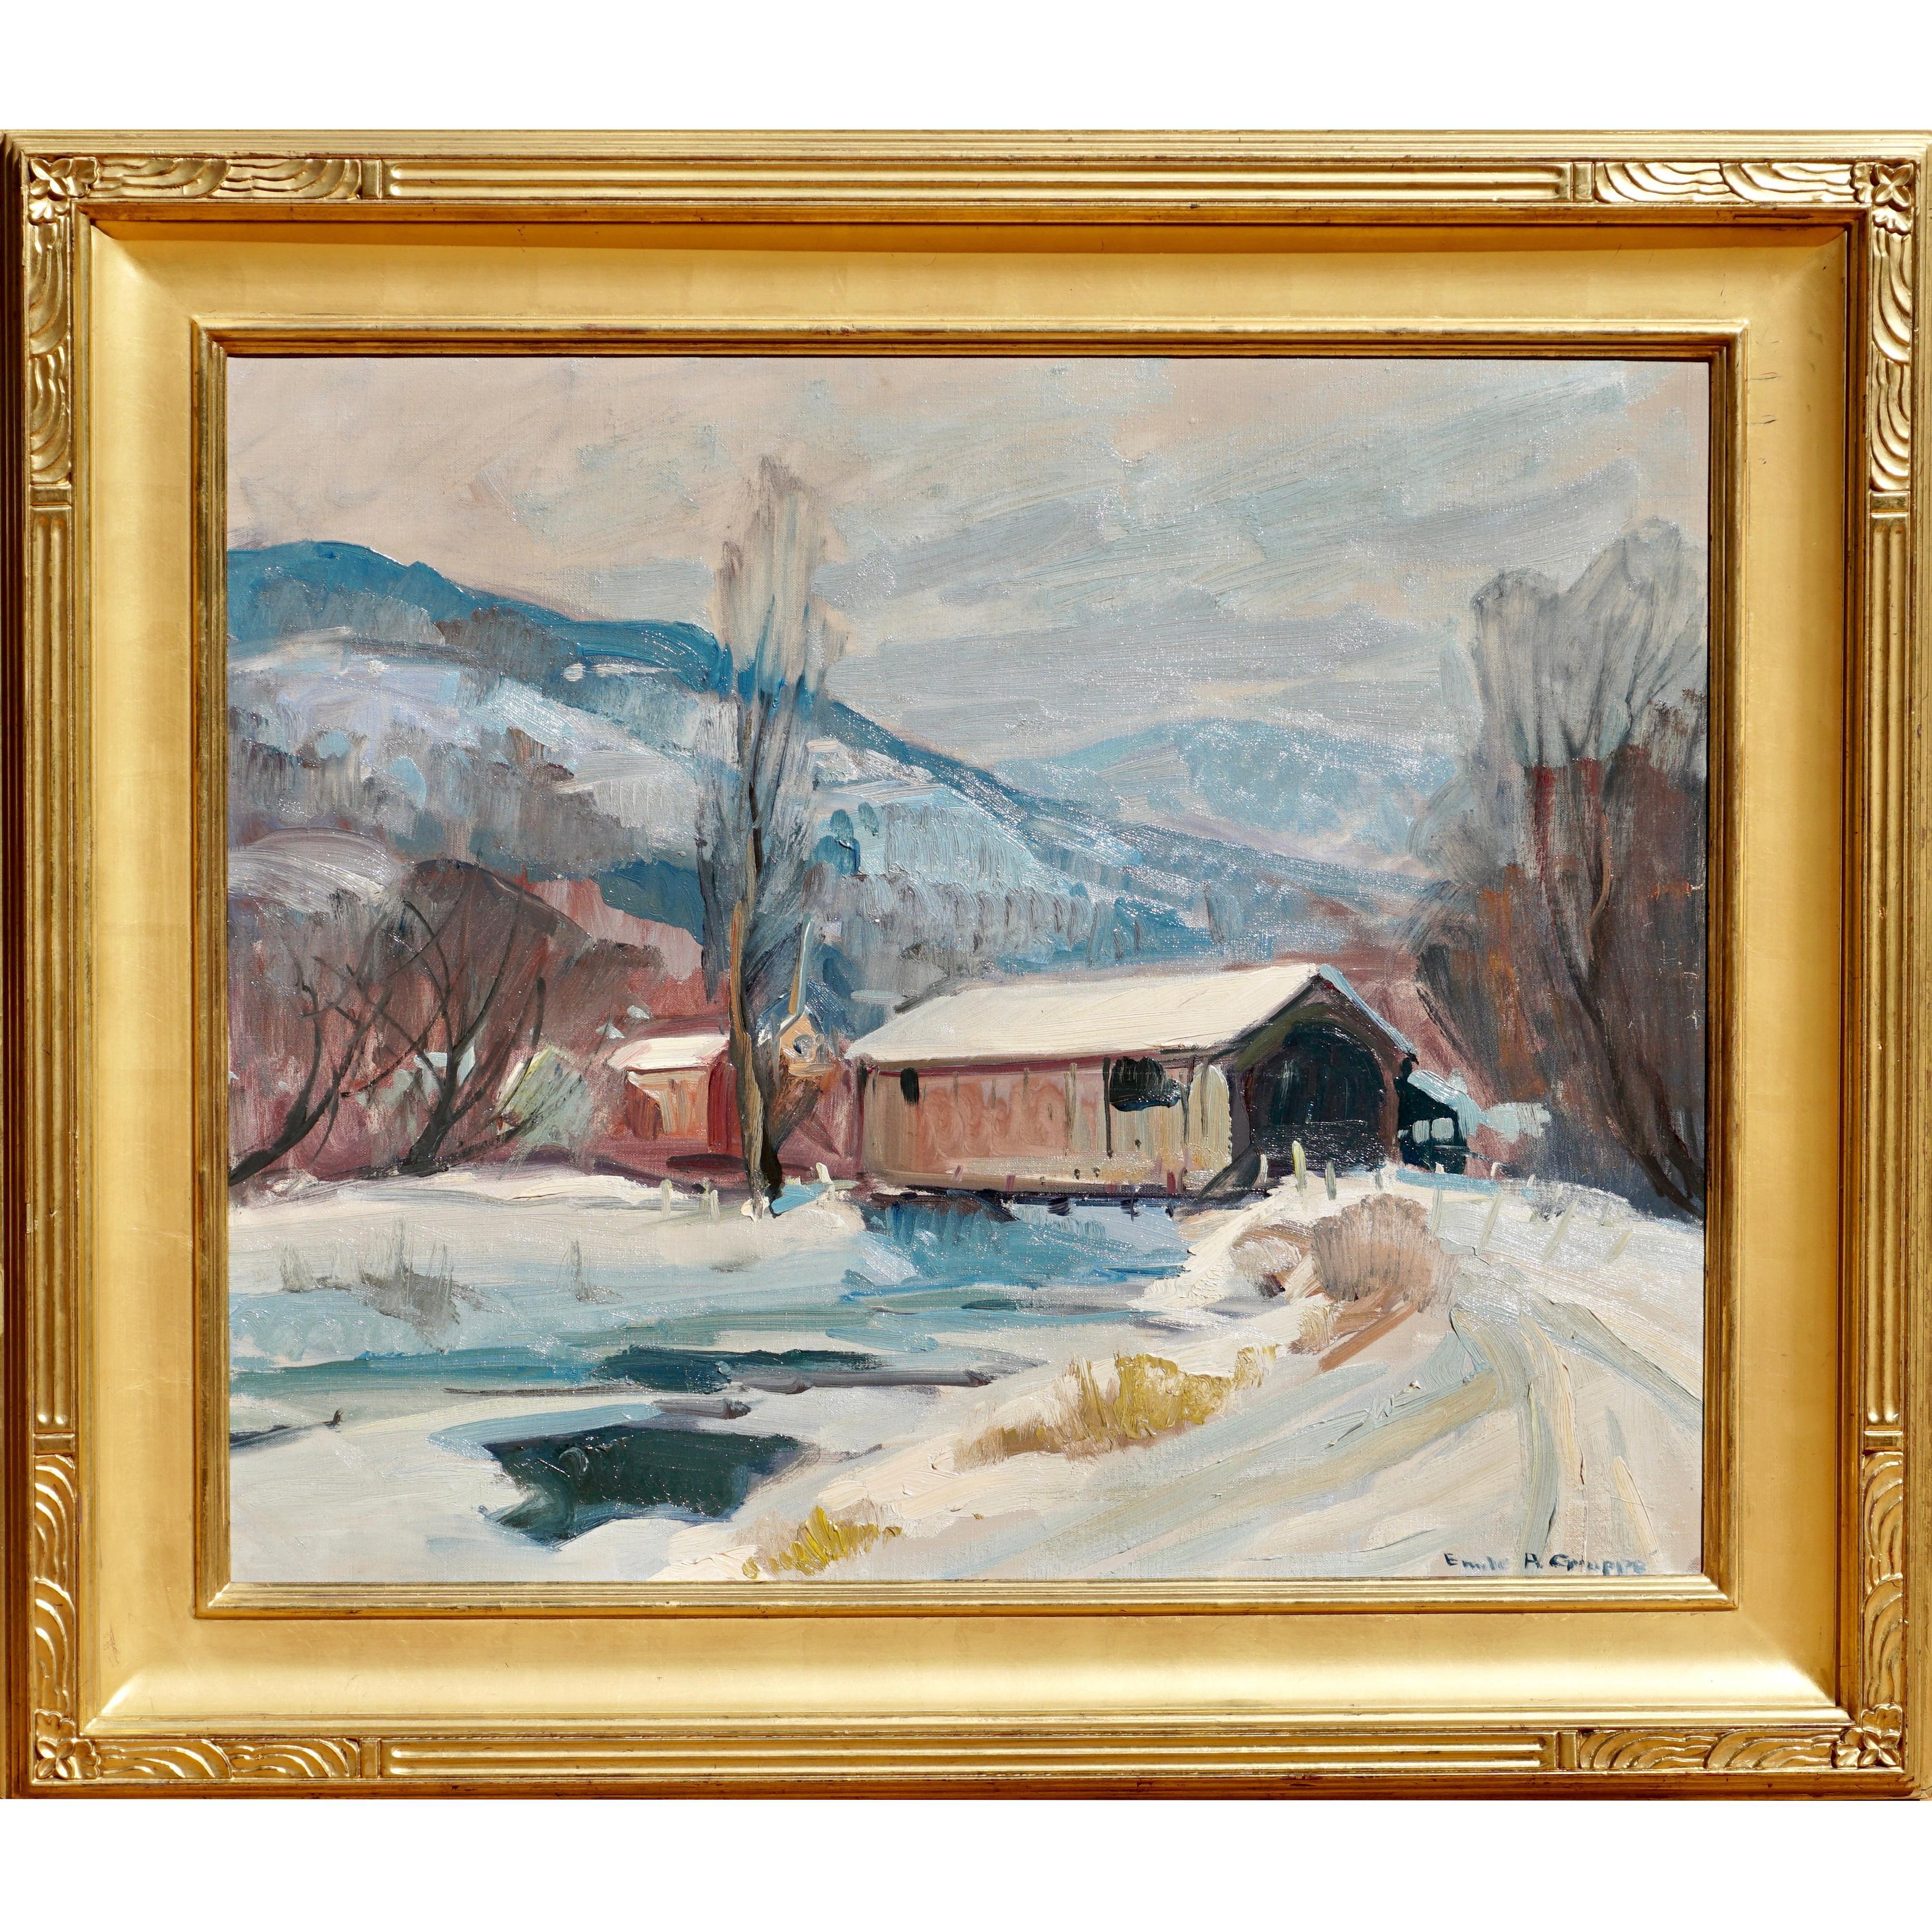 Another delightful large painting by the post impressionist master; Emile Albert Gruppe. The landscape take you down a snow covered road by a cool icy running stream through a New England covered bridge arriving at a canyon village surrounded by